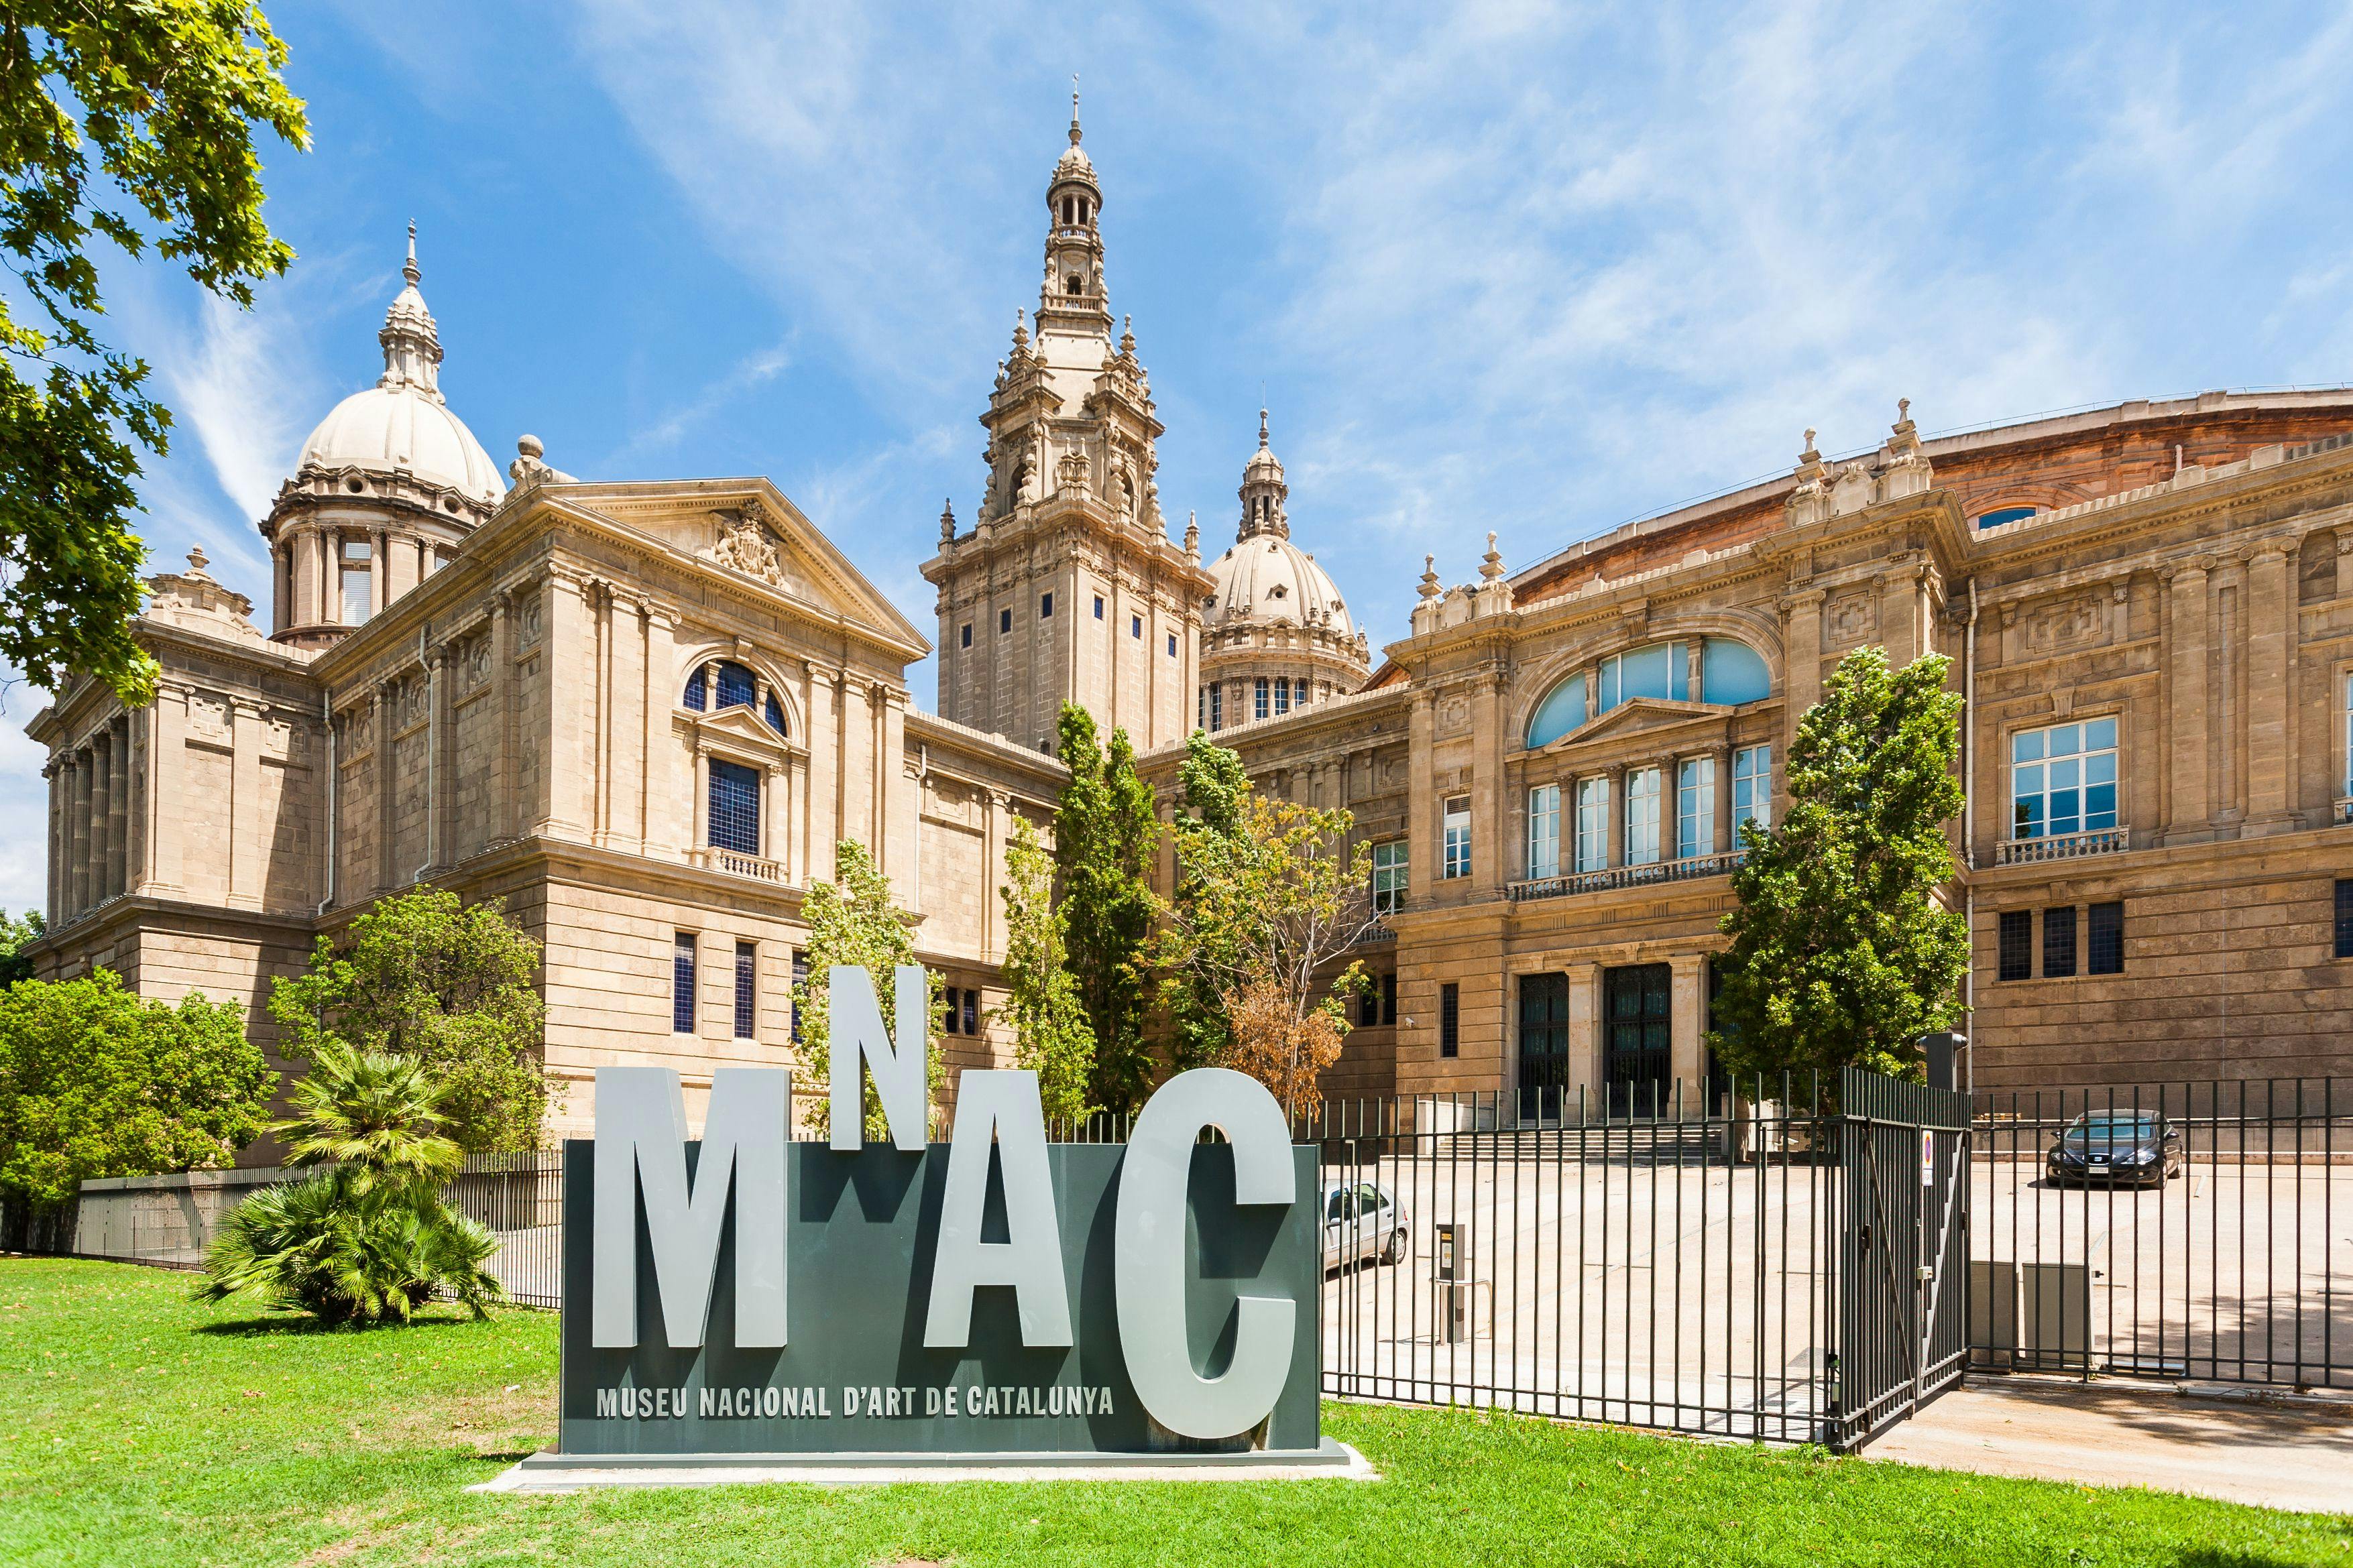 Best museums in barcelona- MNAC (Museu Nacional d’Art de Catalunya) - recommended by ratepunk